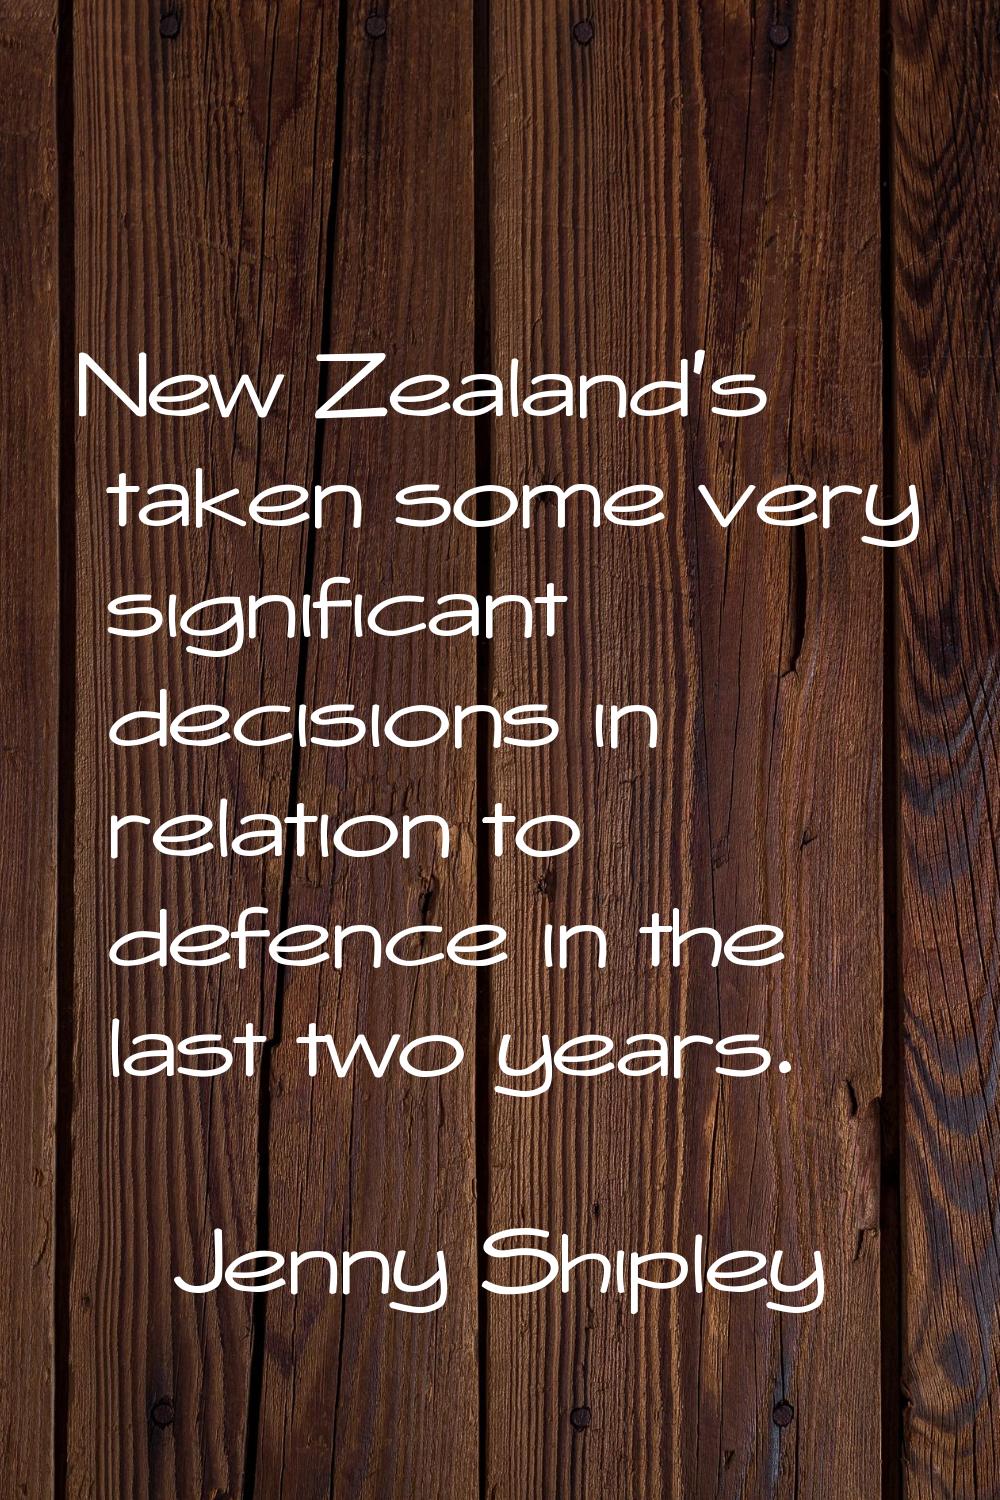 New Zealand's taken some very significant decisions in relation to defence in the last two years.